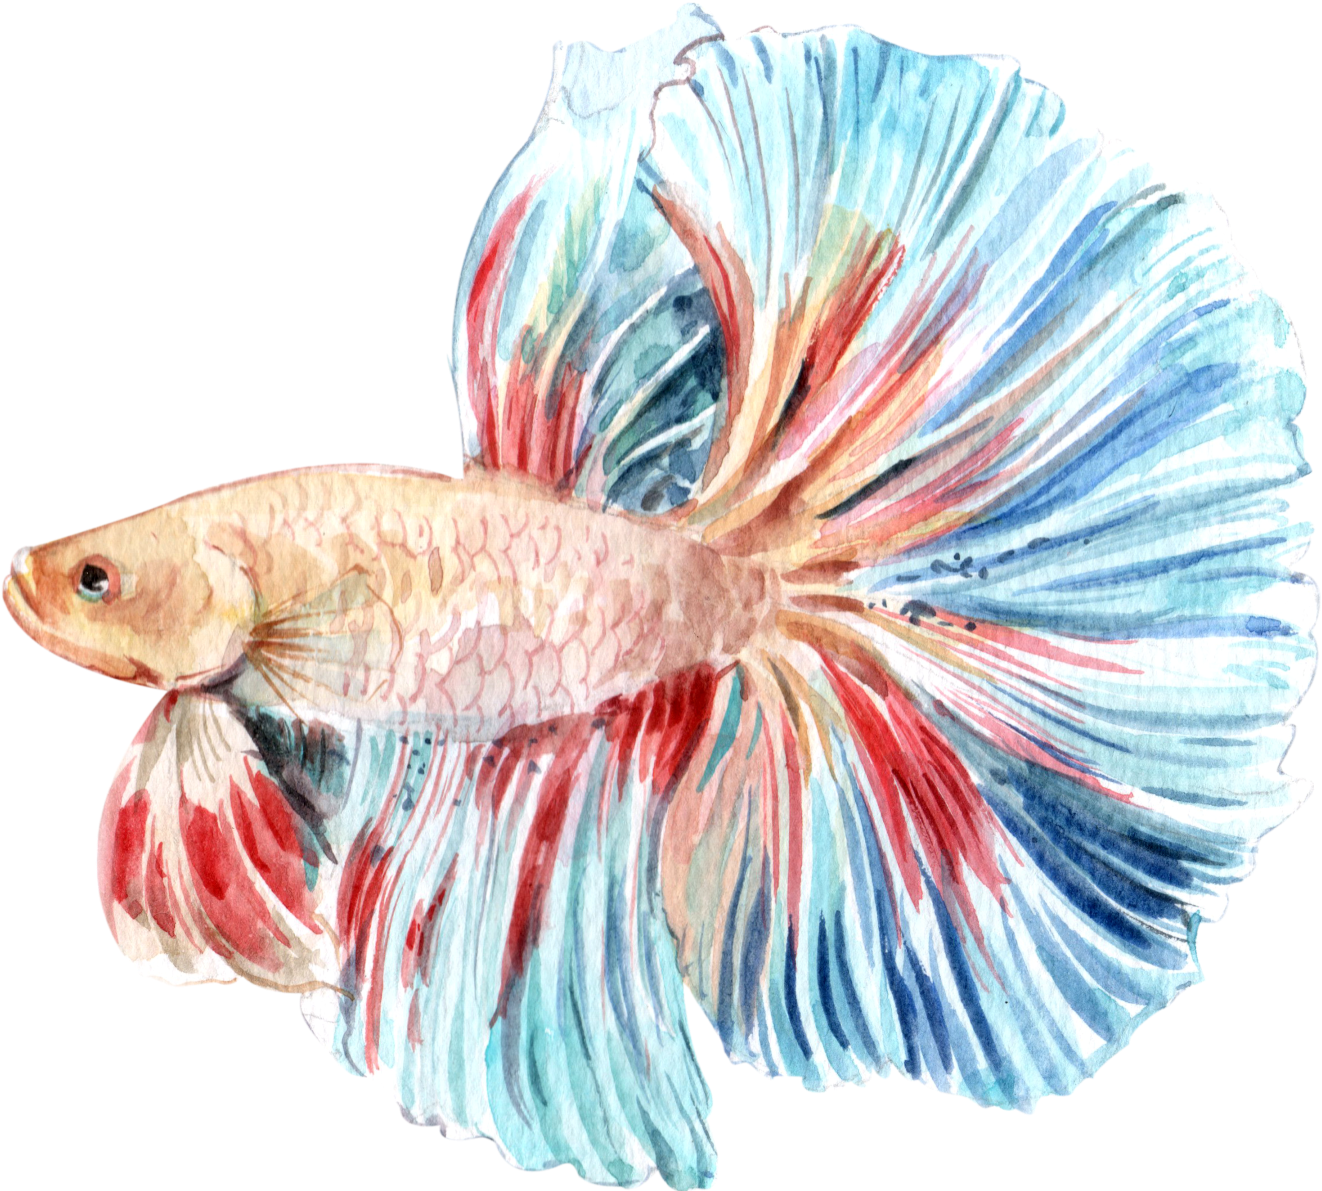 Colorful Betta Fish Illustration PNG image